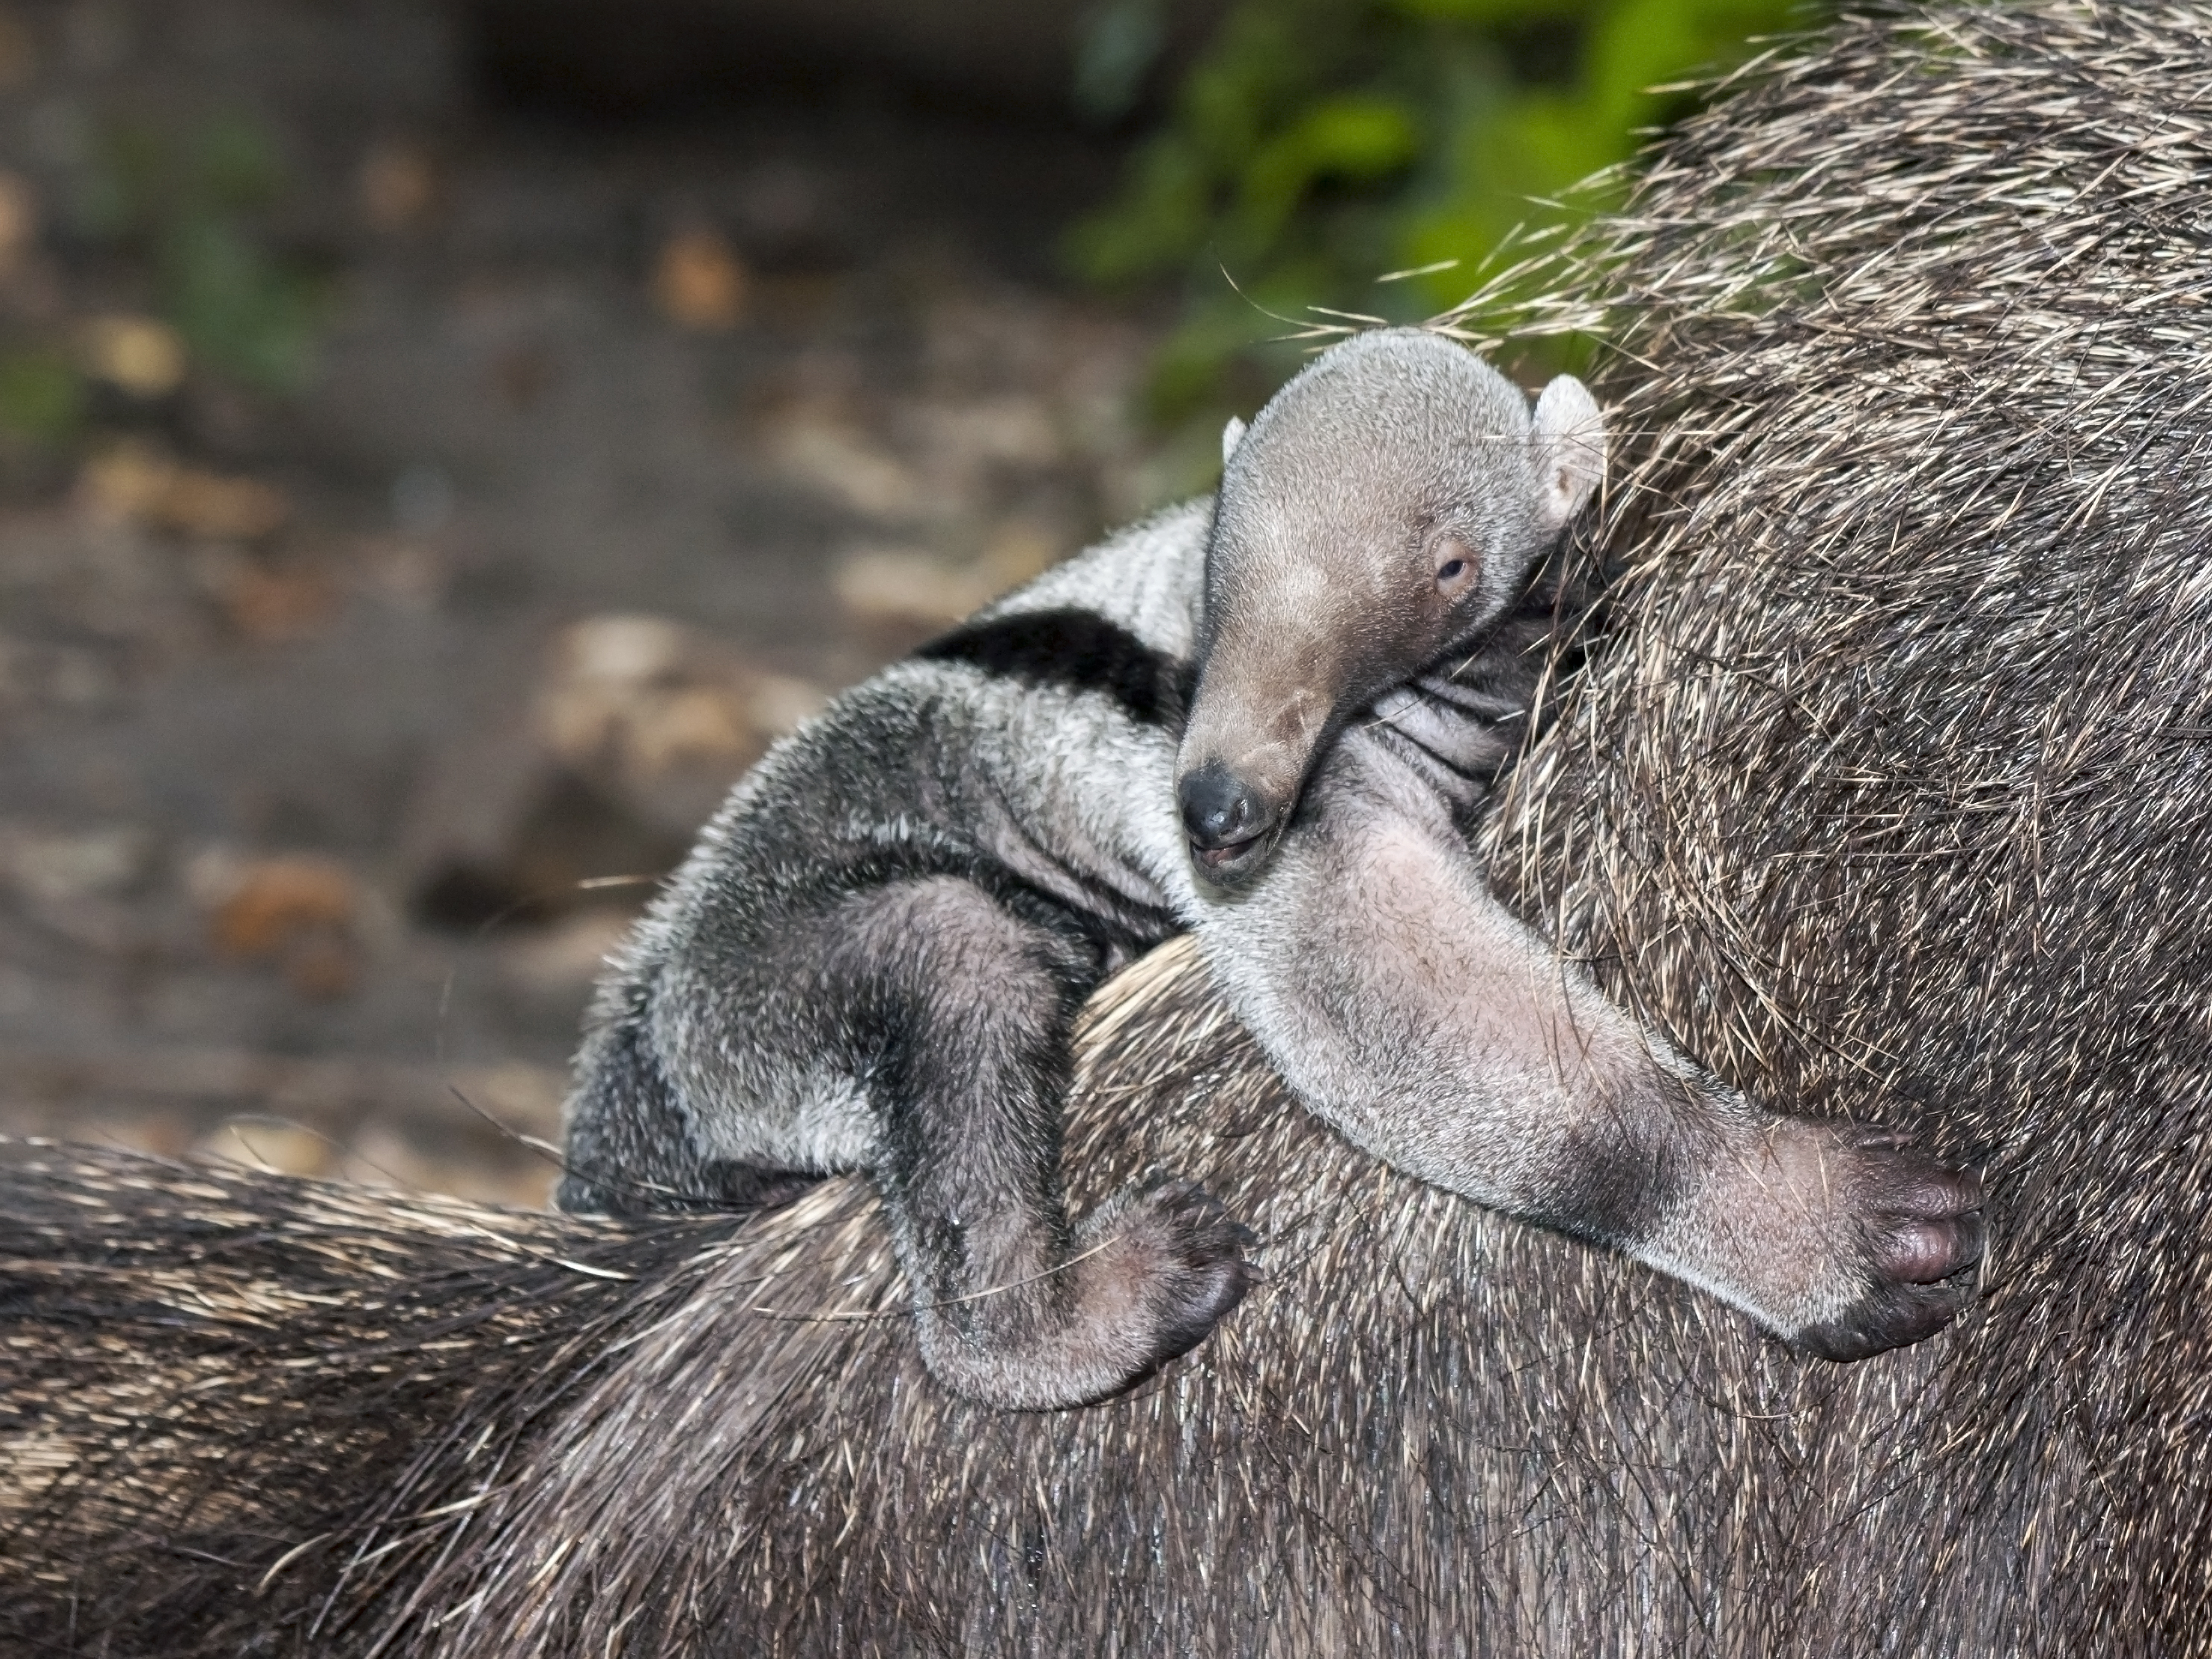 Small grey and black anteater pup clings to it's mothers back